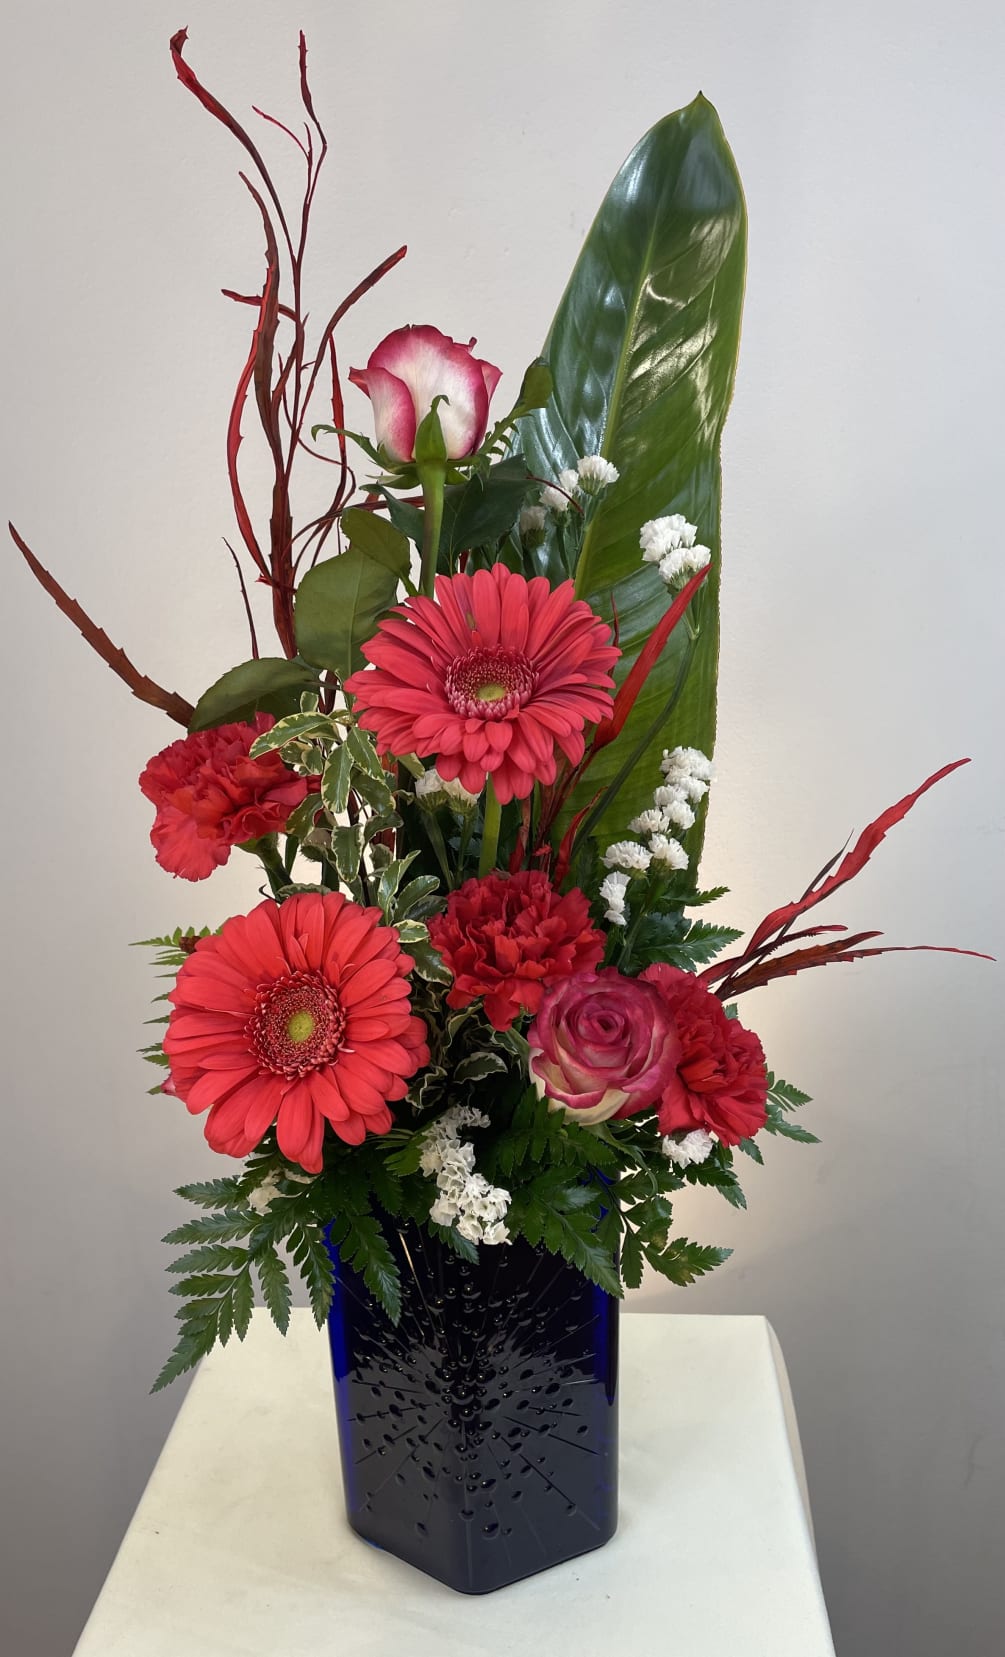 A contemporary des[gn featuring red gerberas in our popular blue starburst vase.